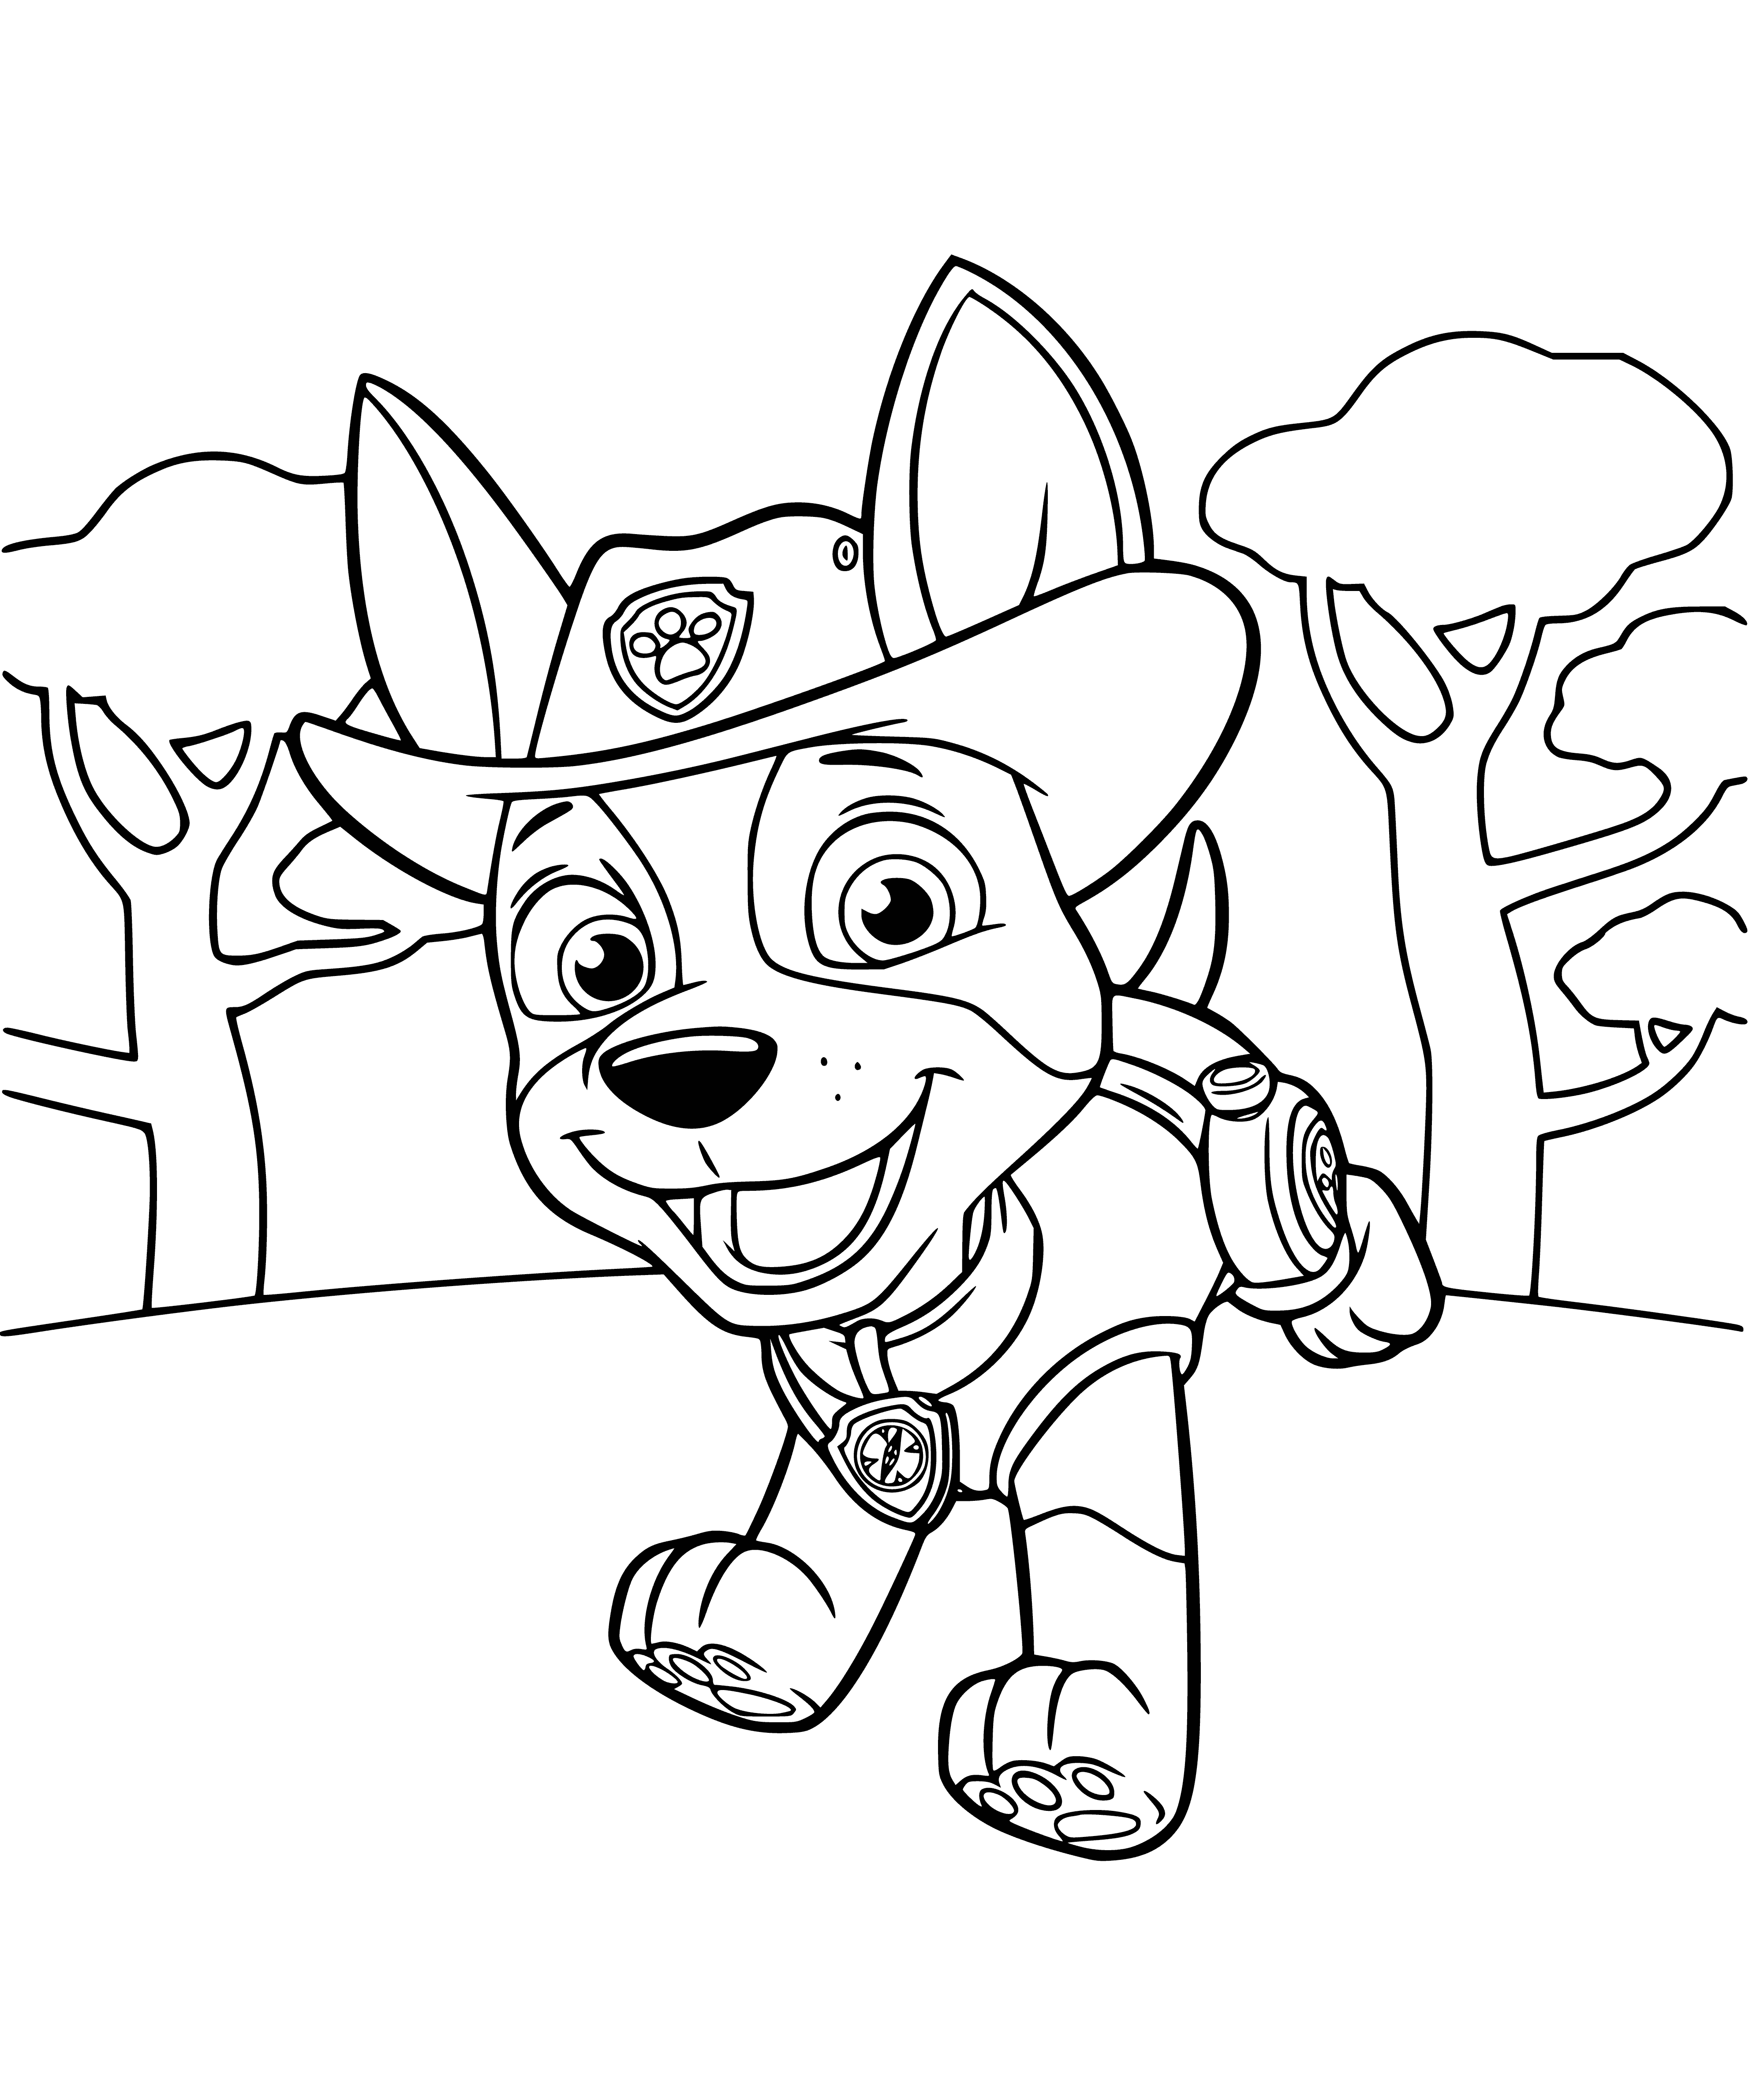 Tracker coloring page